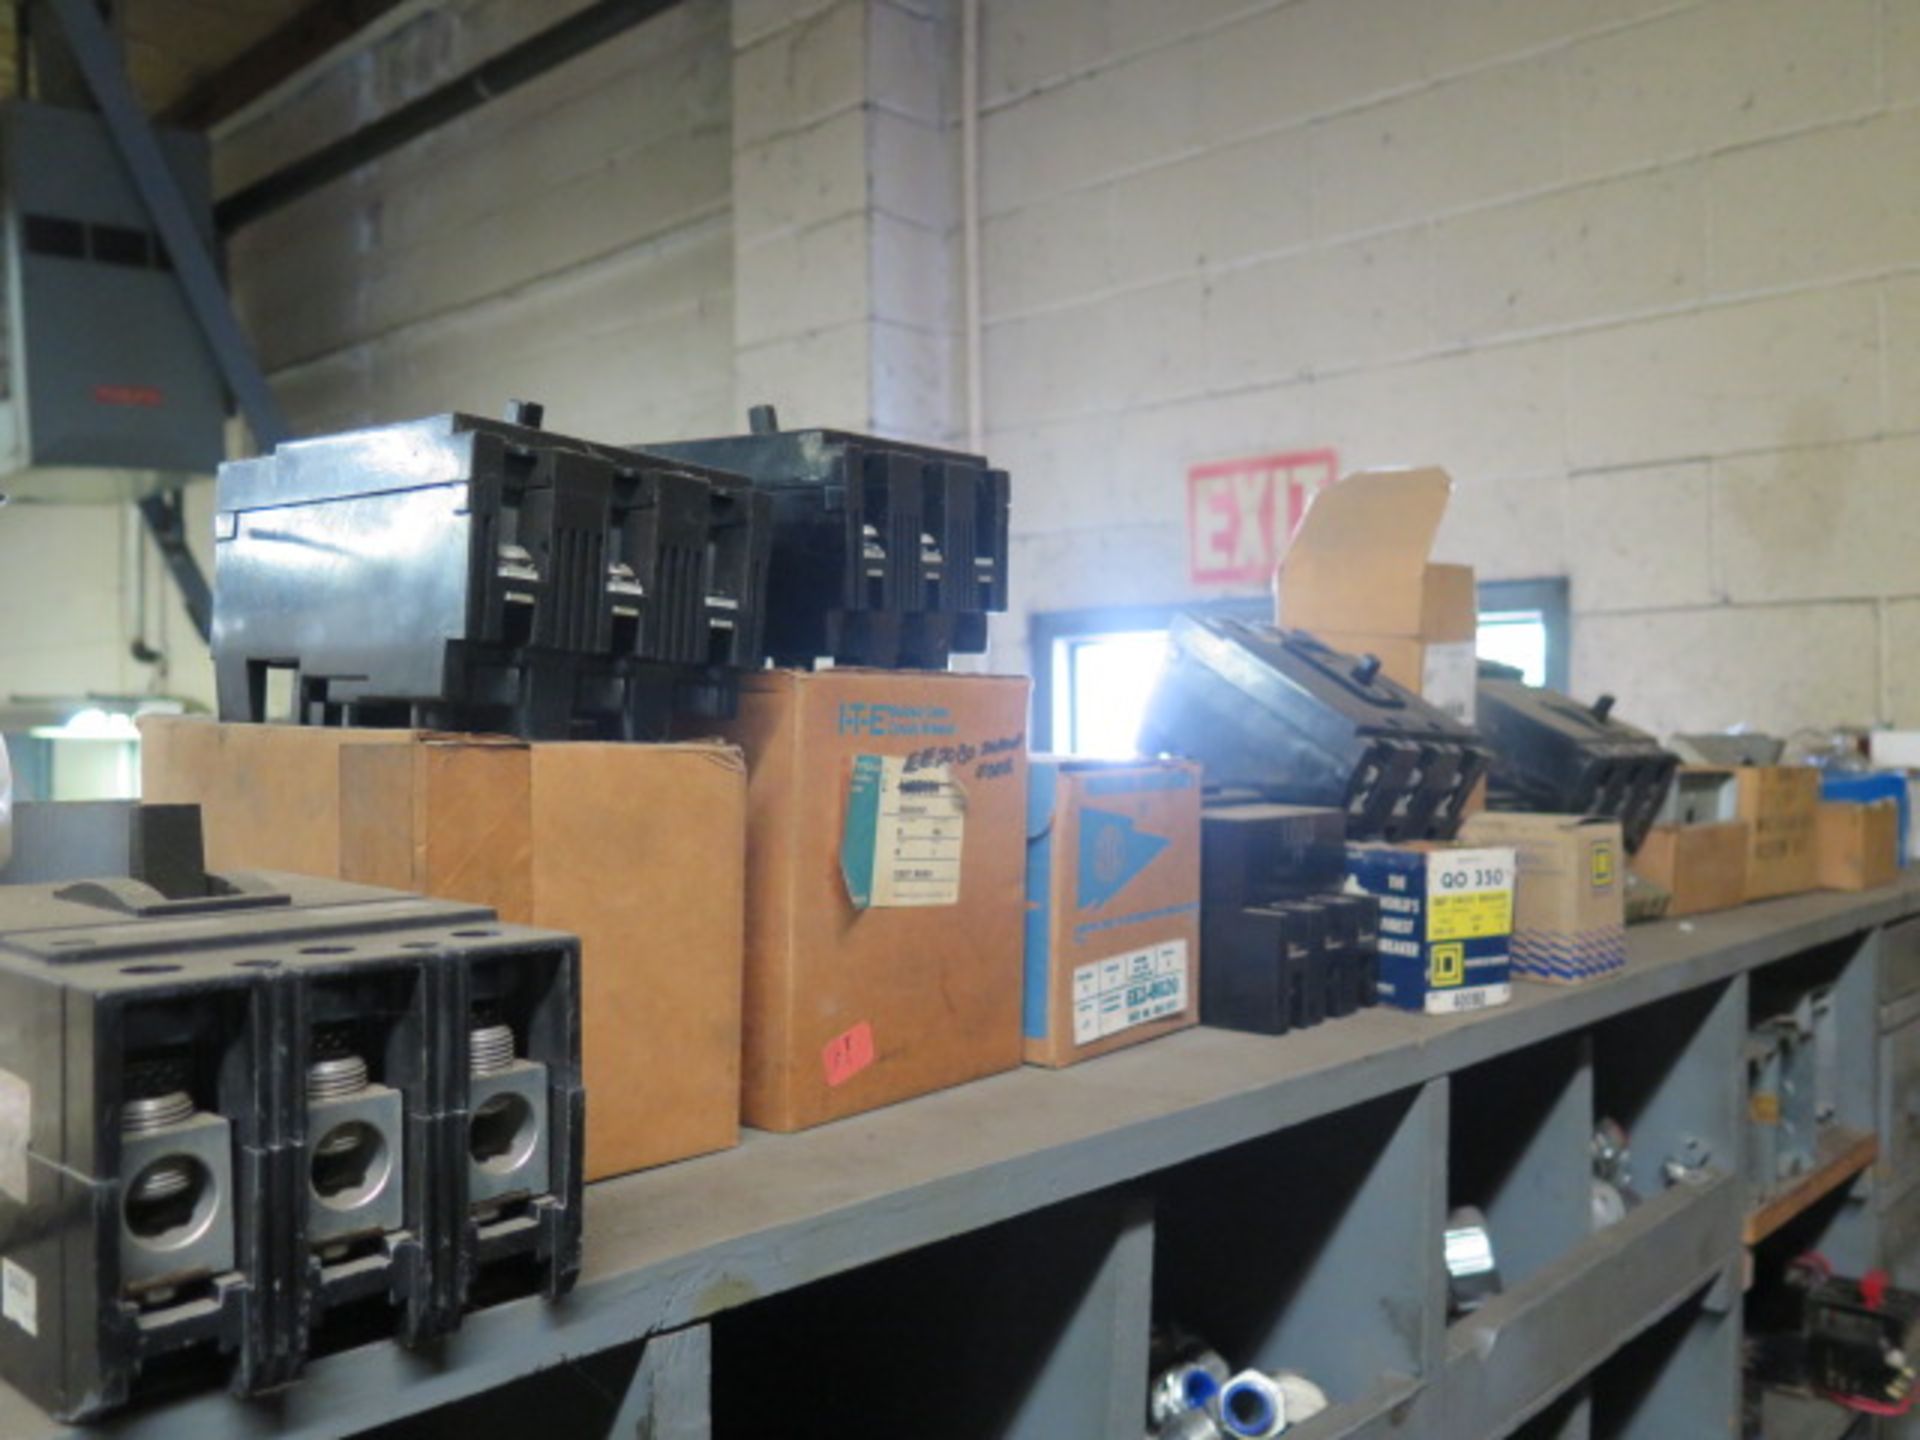 Contents of Maintenance Area, Repair Parts, Electrical, Shop Supplies, Tables, Cabinets and - Image 8 of 20